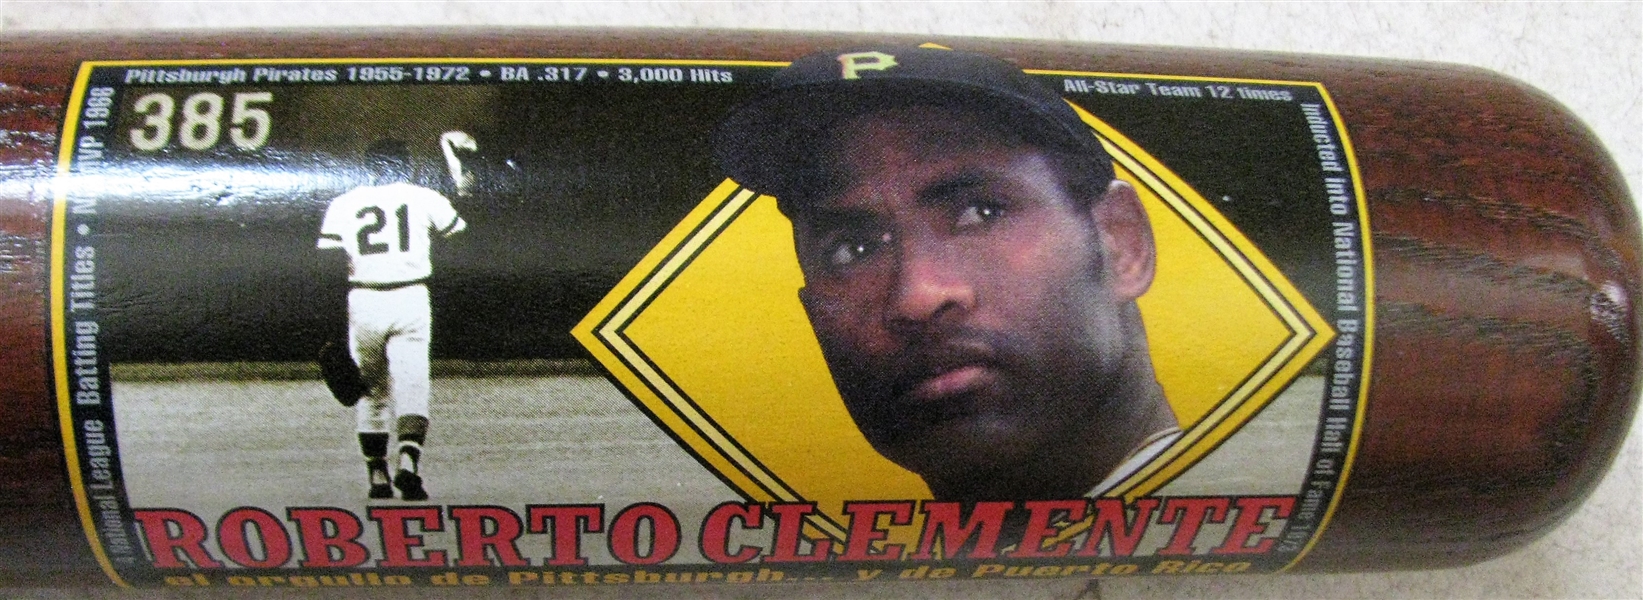 ROBERTO CLEMENTE COOPERSTOWN LE PICTURE BAT 